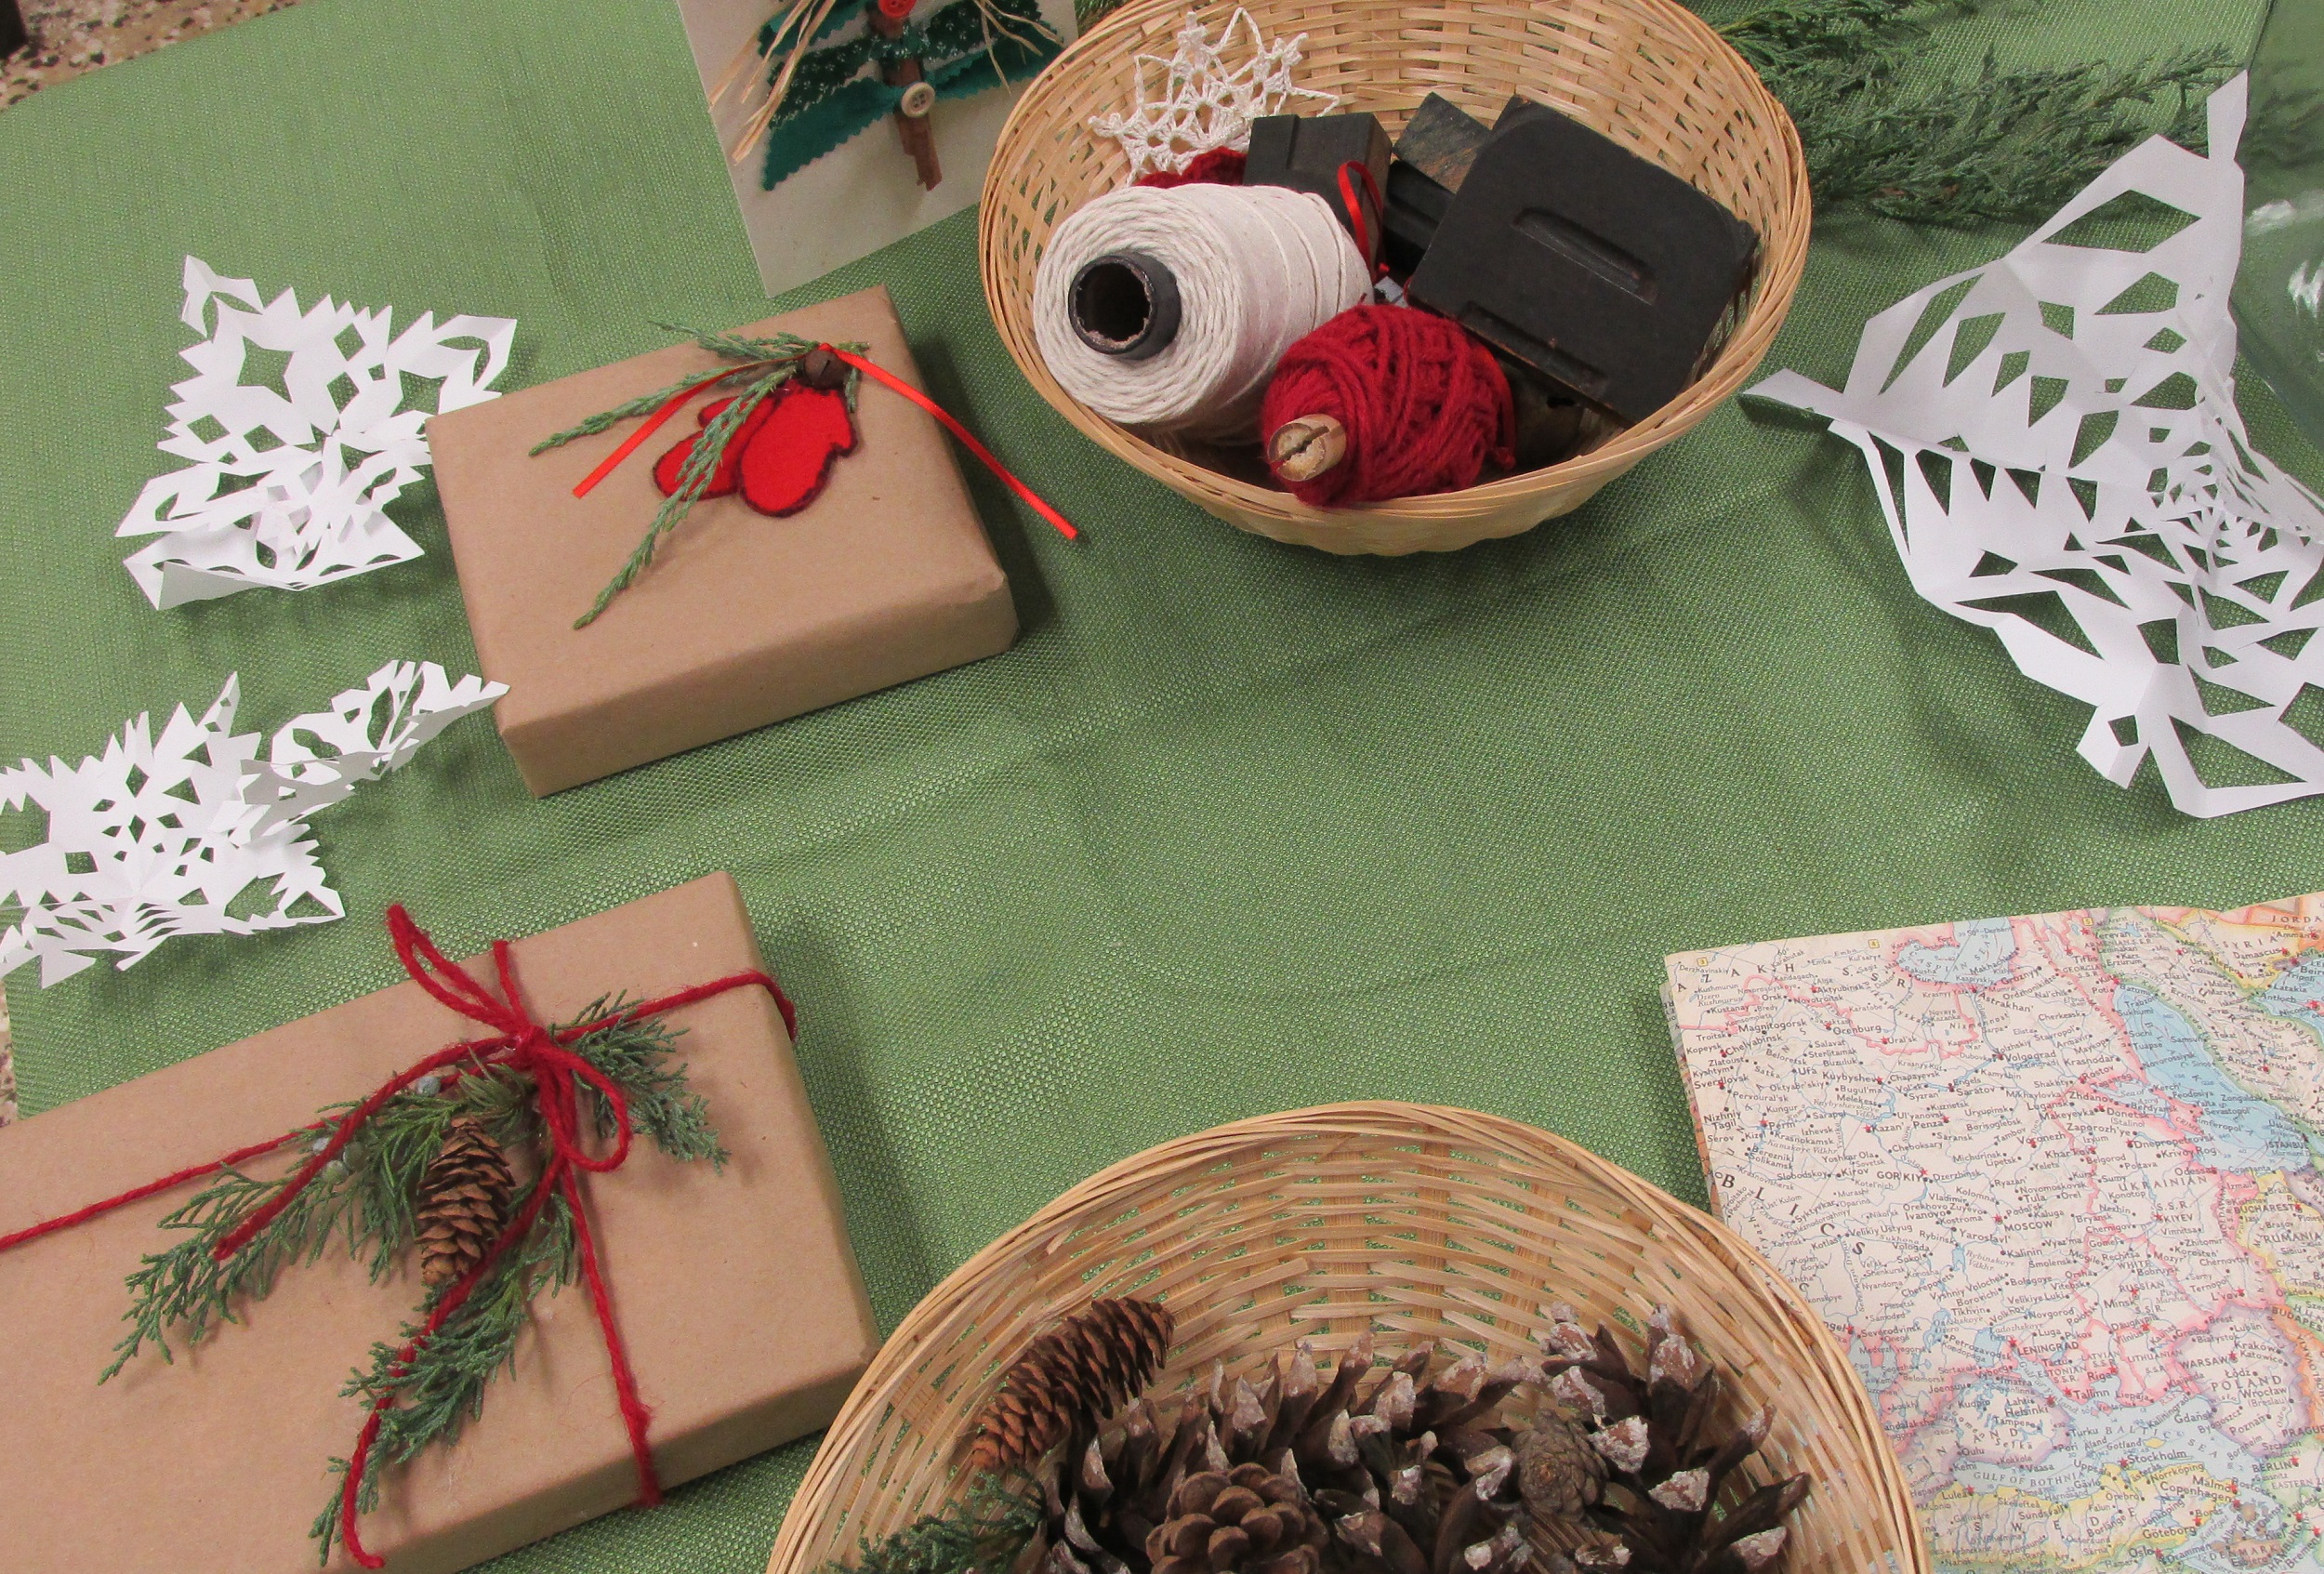 Table with wrapped presents, paper snowflakes, and pinecones